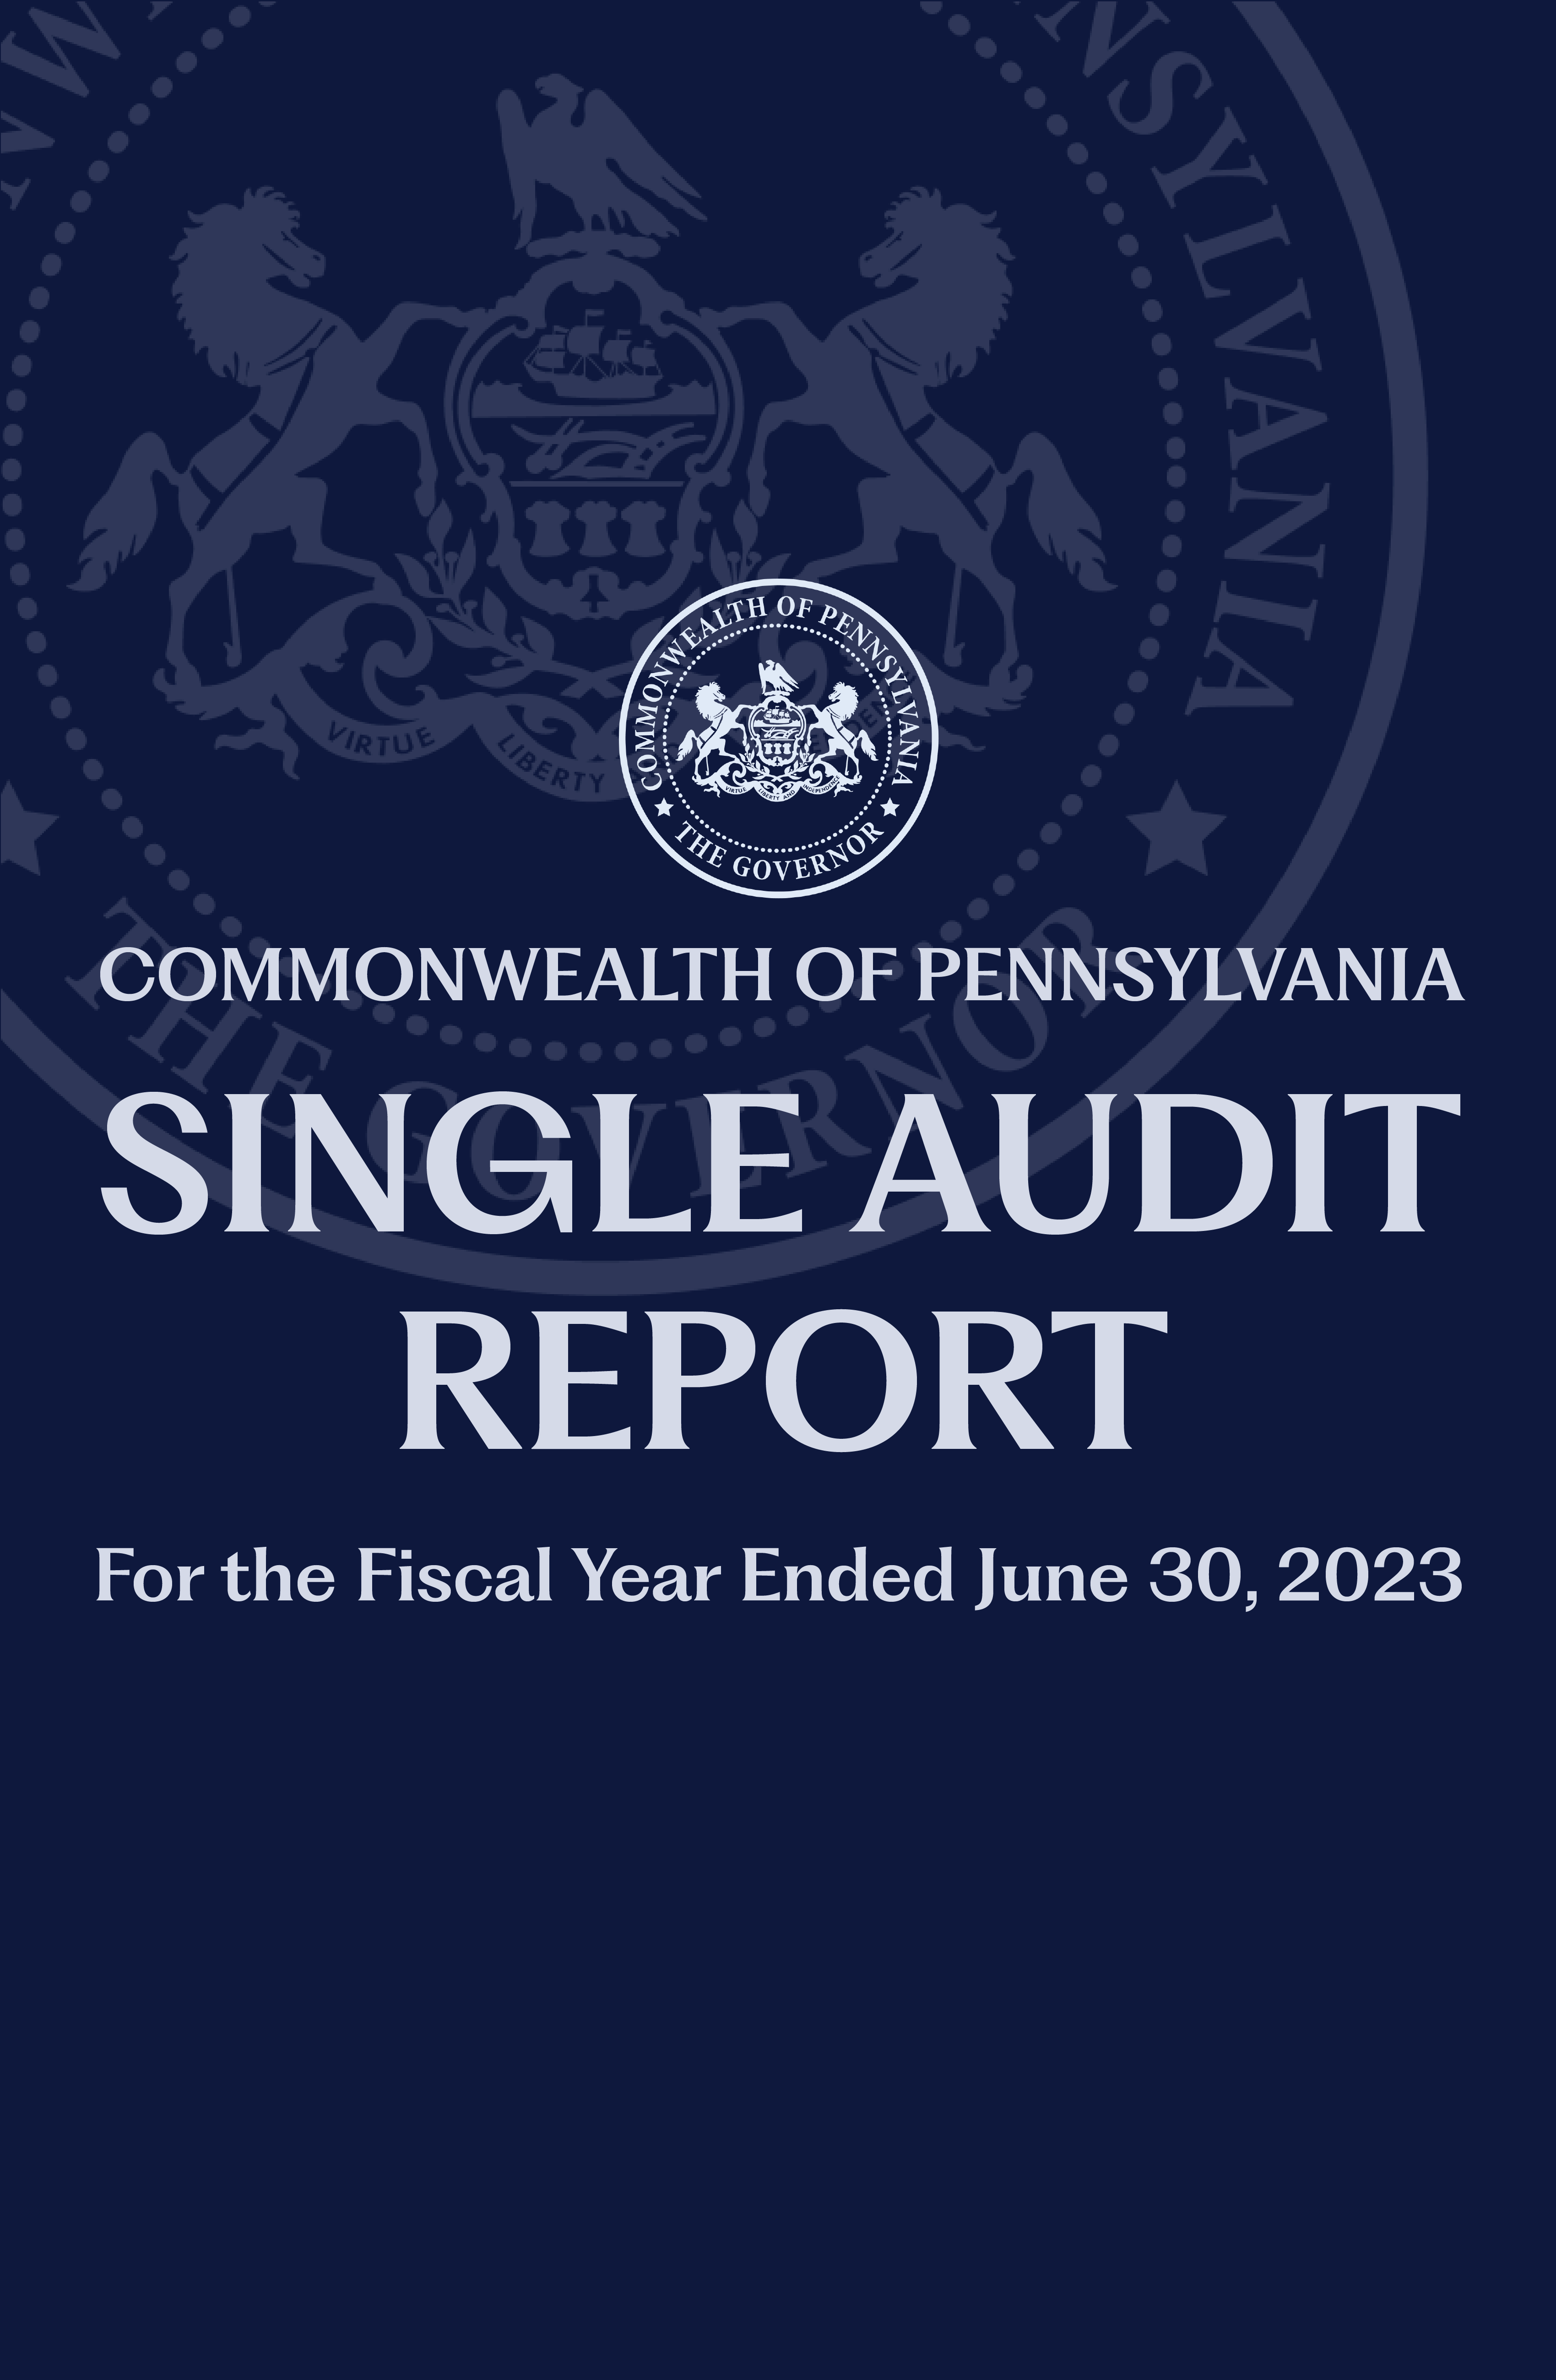 Image of the June 30, 2023 Single Audit Report Cover